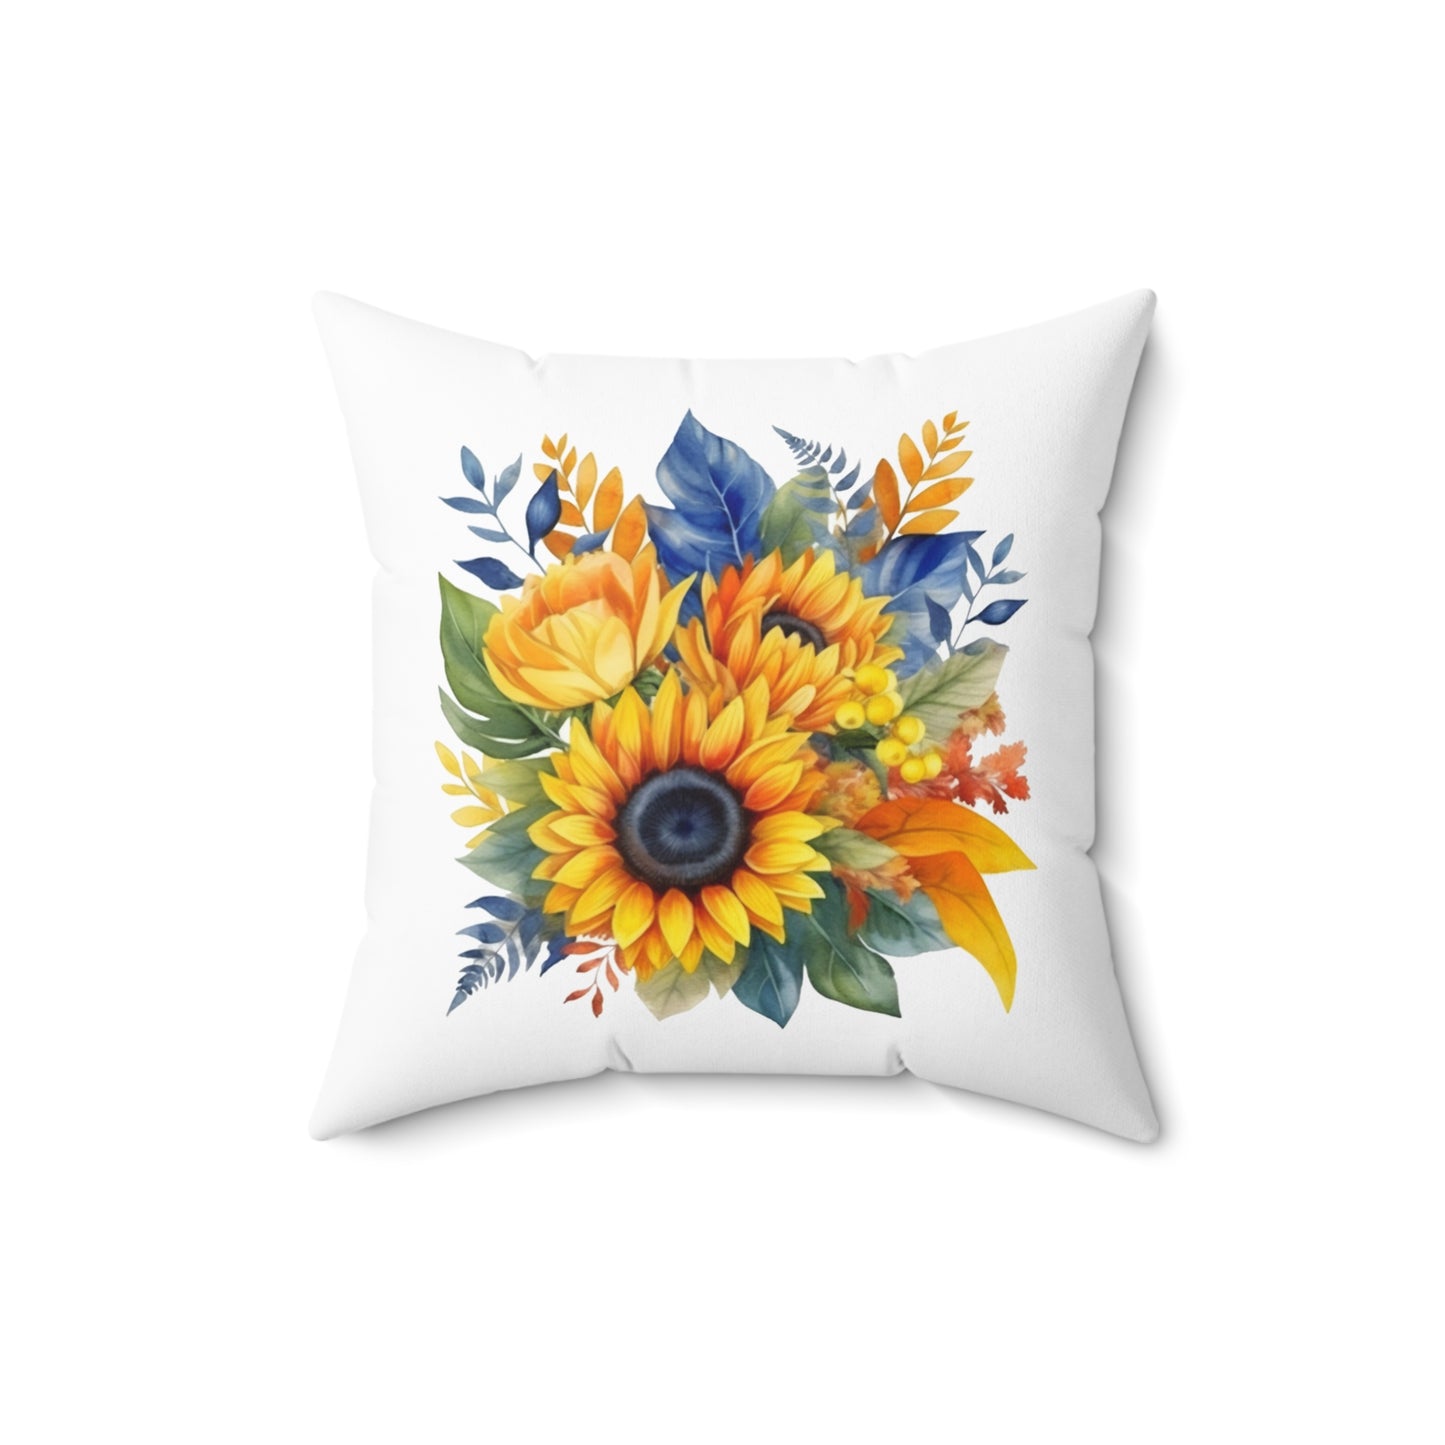 Sunflowers Throw Pillow, Watercolor Sunflowers Decorative Pillow, Square Flower Cushion, Double Sided Accent Pillow, Concealed Zipper